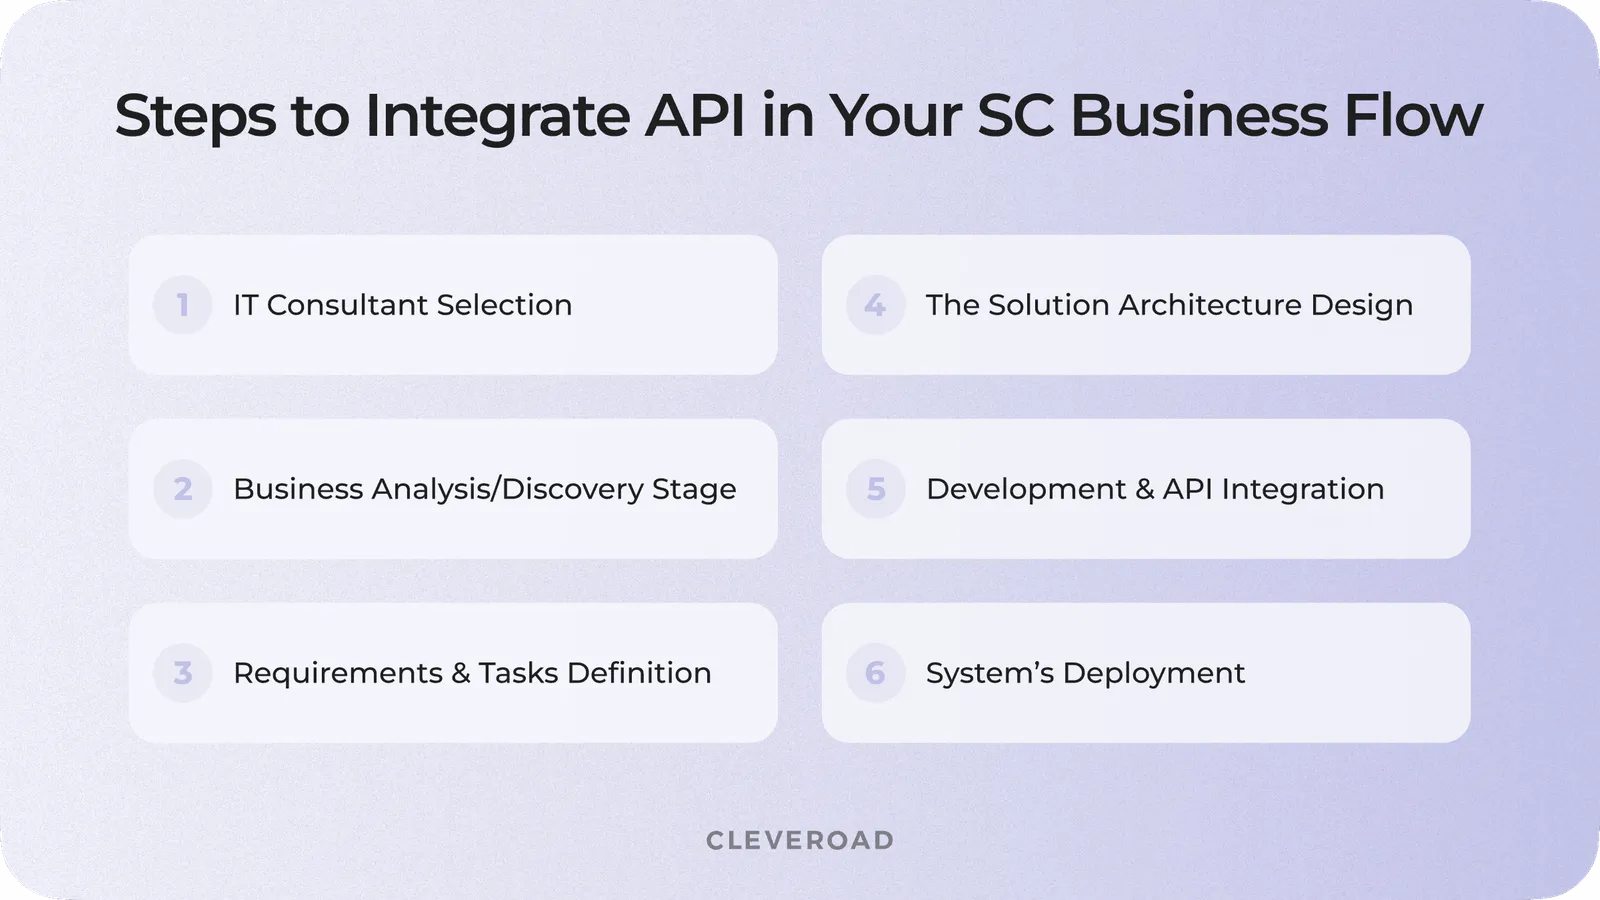 How to integrate API in your SC business flow through the software?